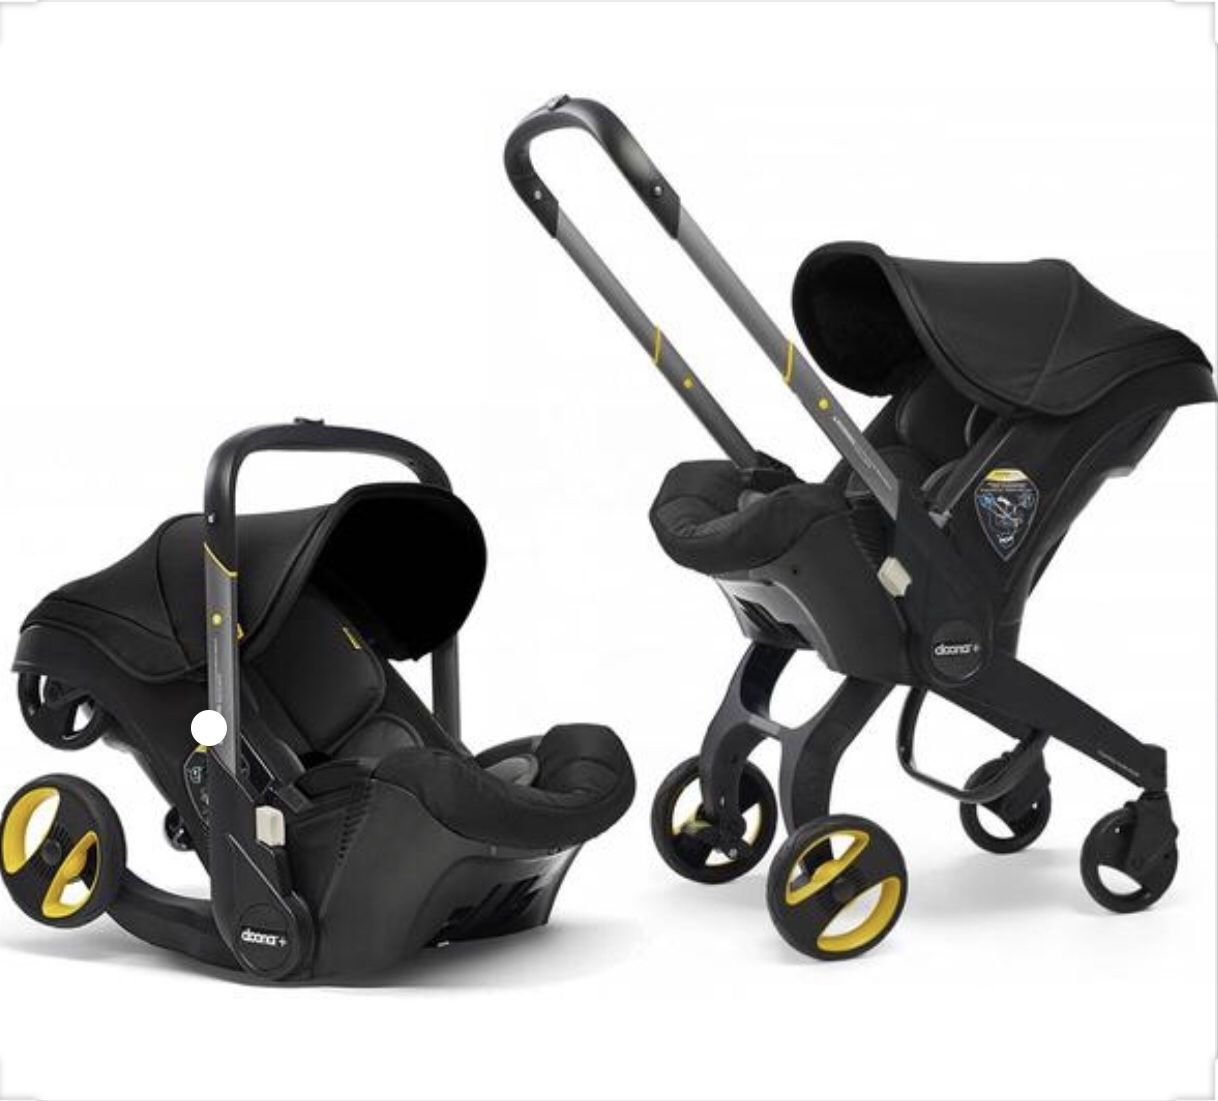 Doona car seat and stroller all in one.